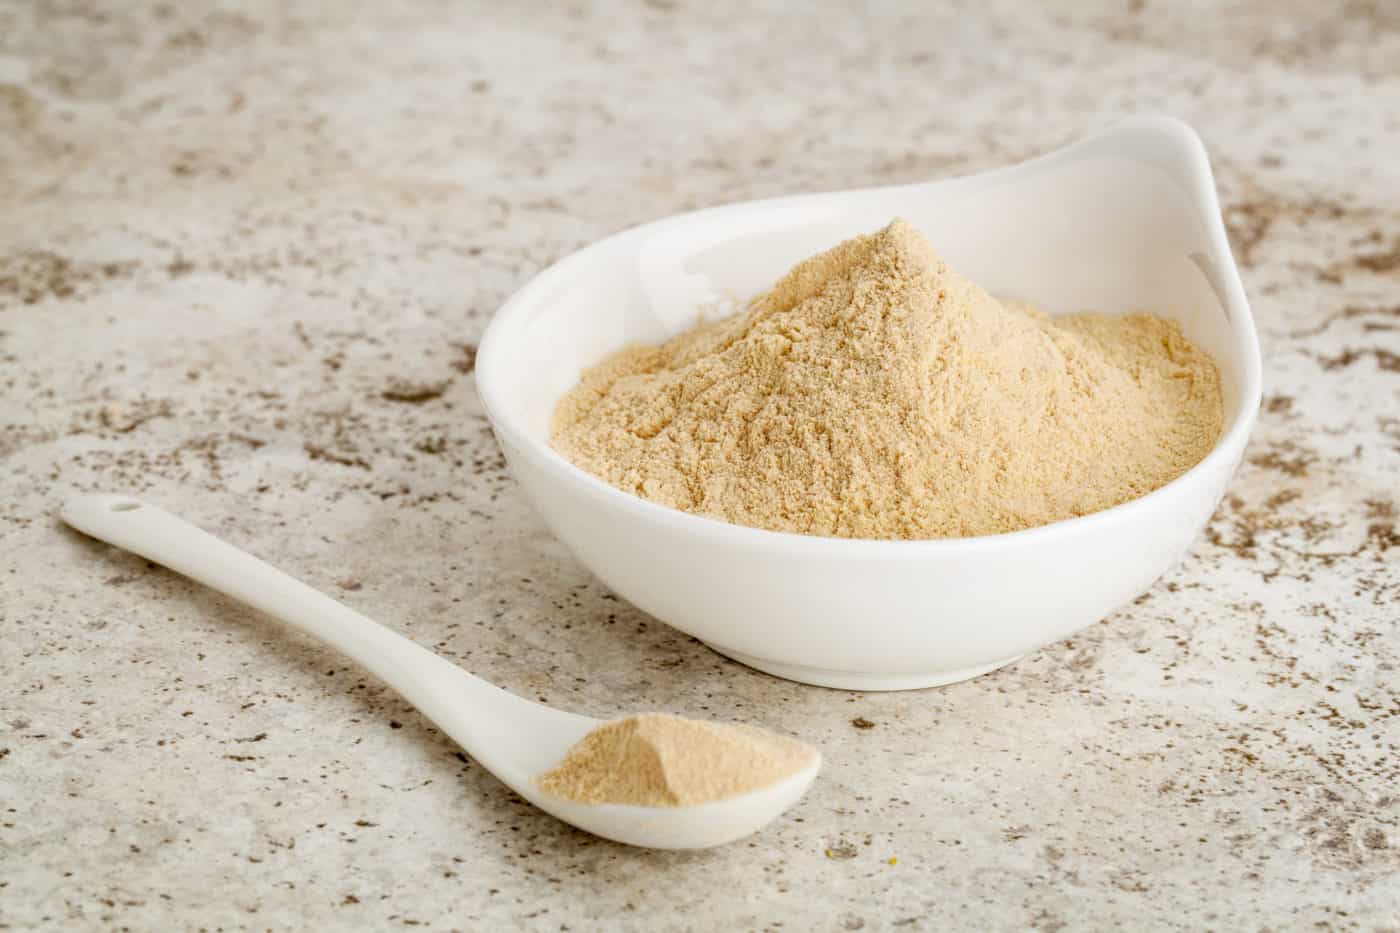 maca root powder - a small bowl with a spoon against ceramic tile surface